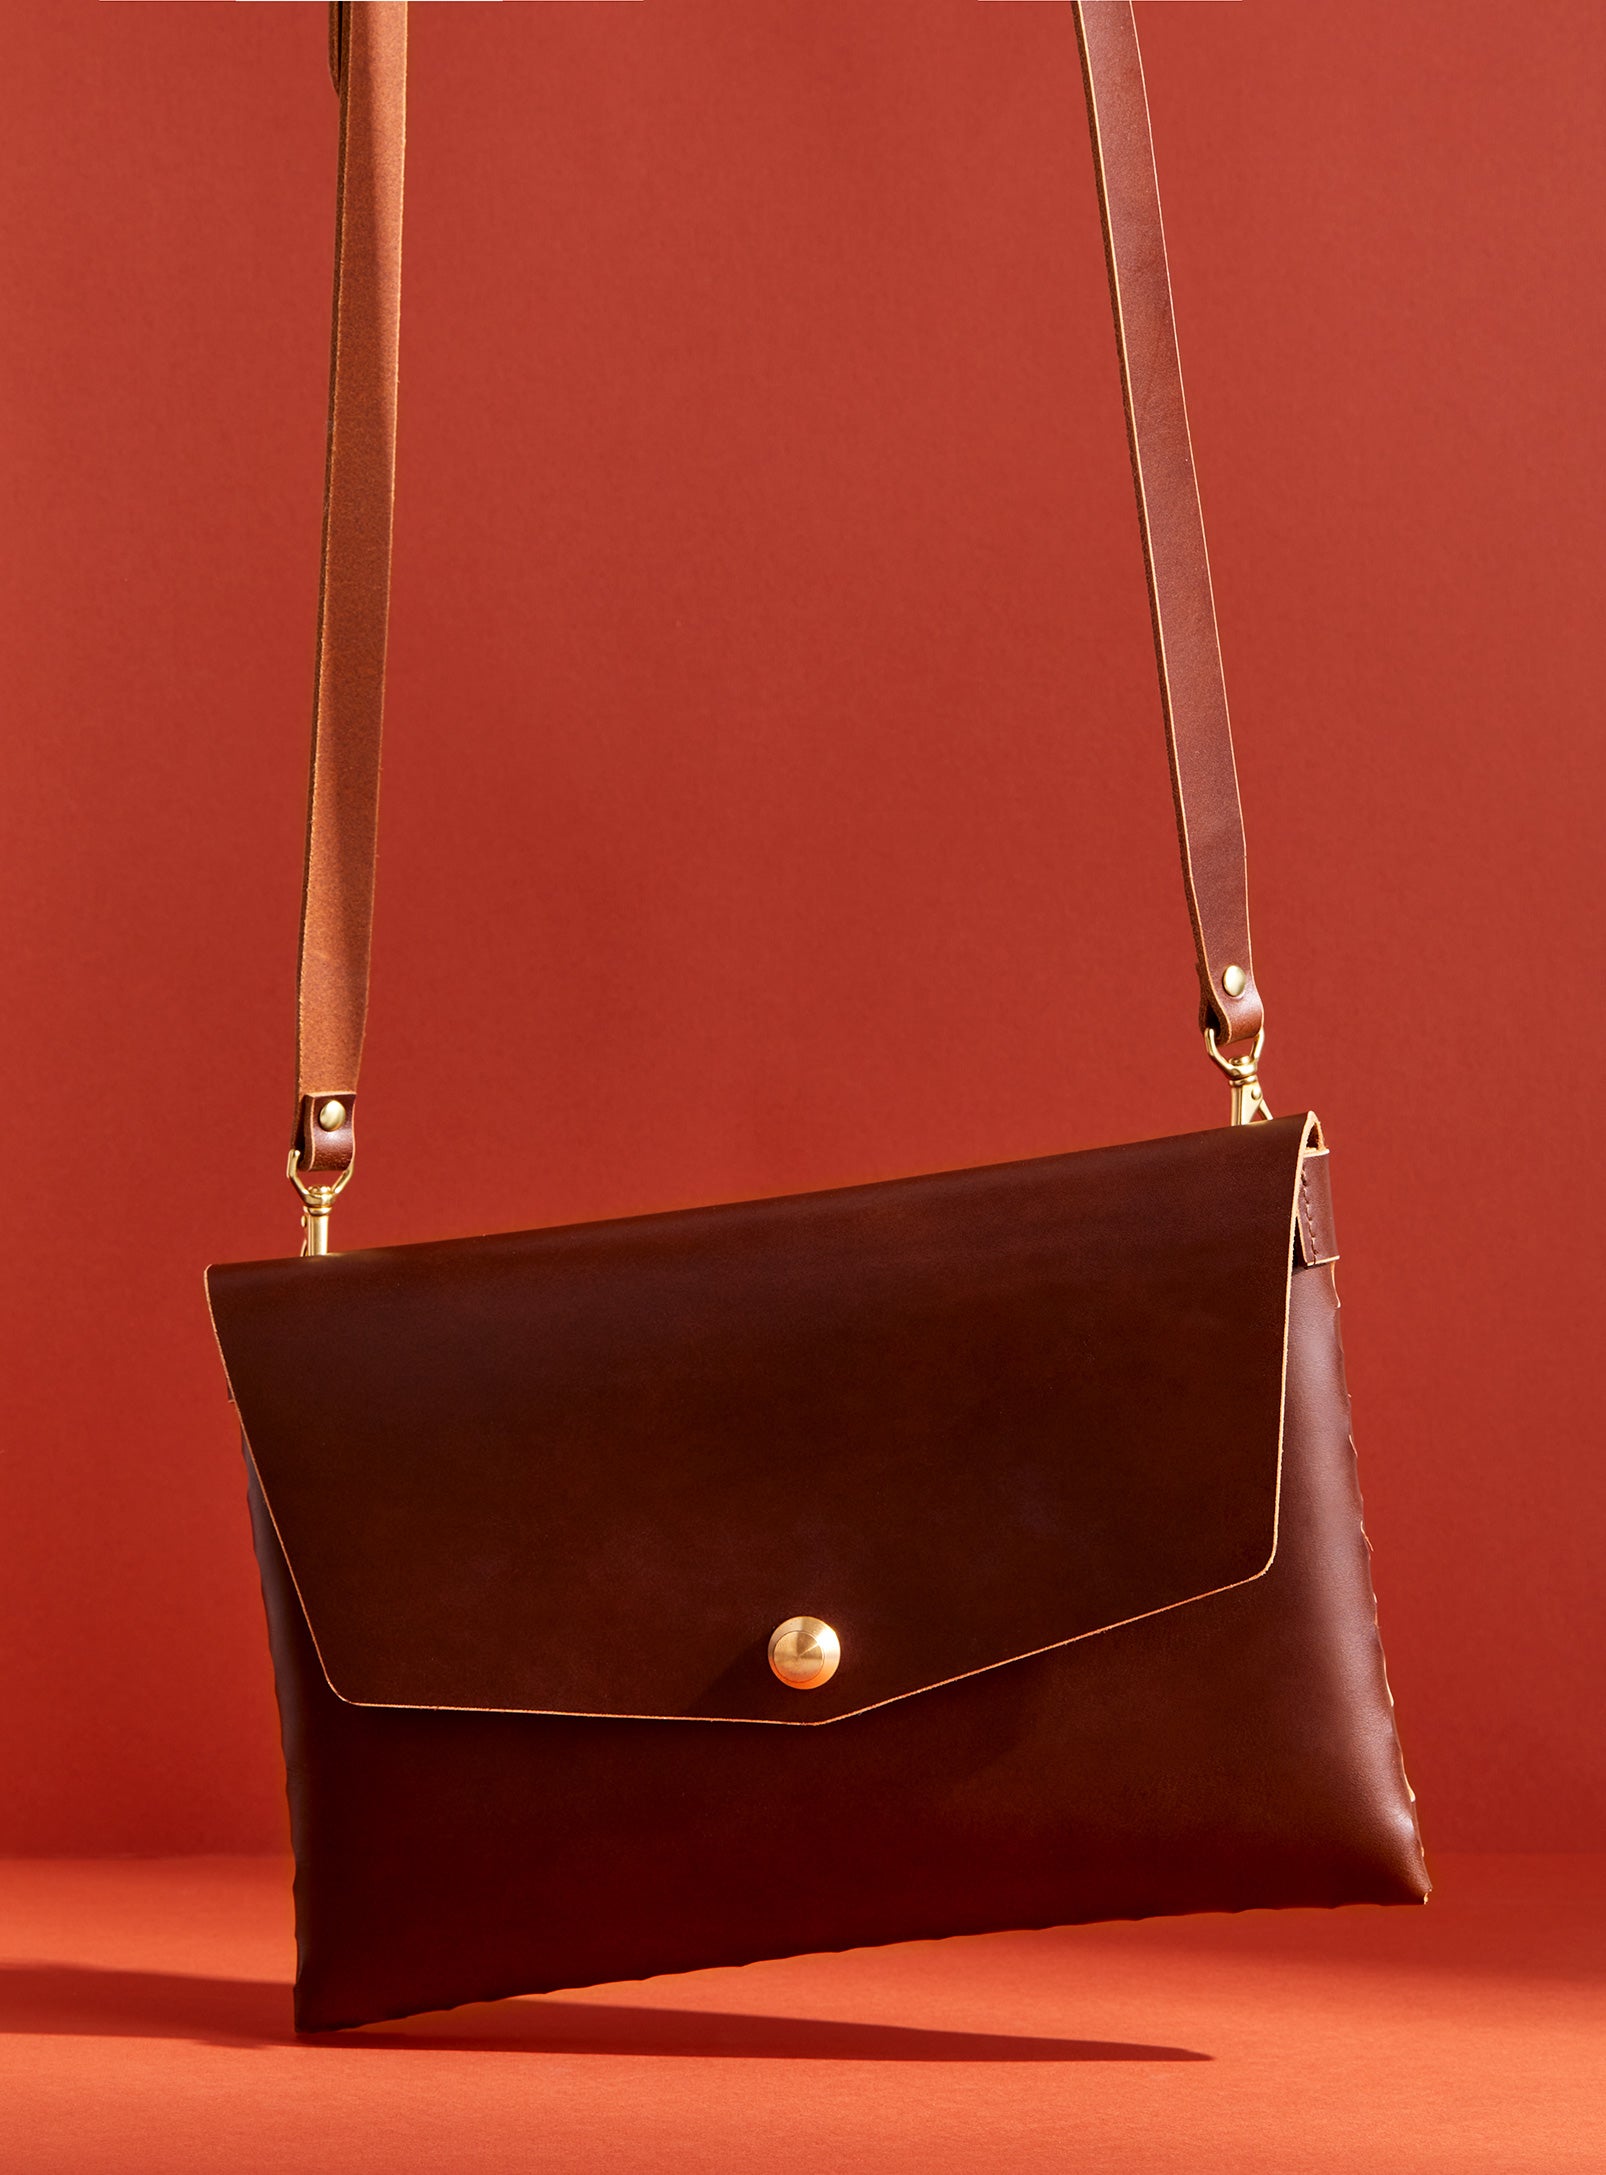 modjūl’s leather mini bag deluxe bag in brown. A larger take on the classic mini bag, a rectangular-shaped bag with long detachable straps, handcrafted in Canada using quality Italian leather and brass hardware.